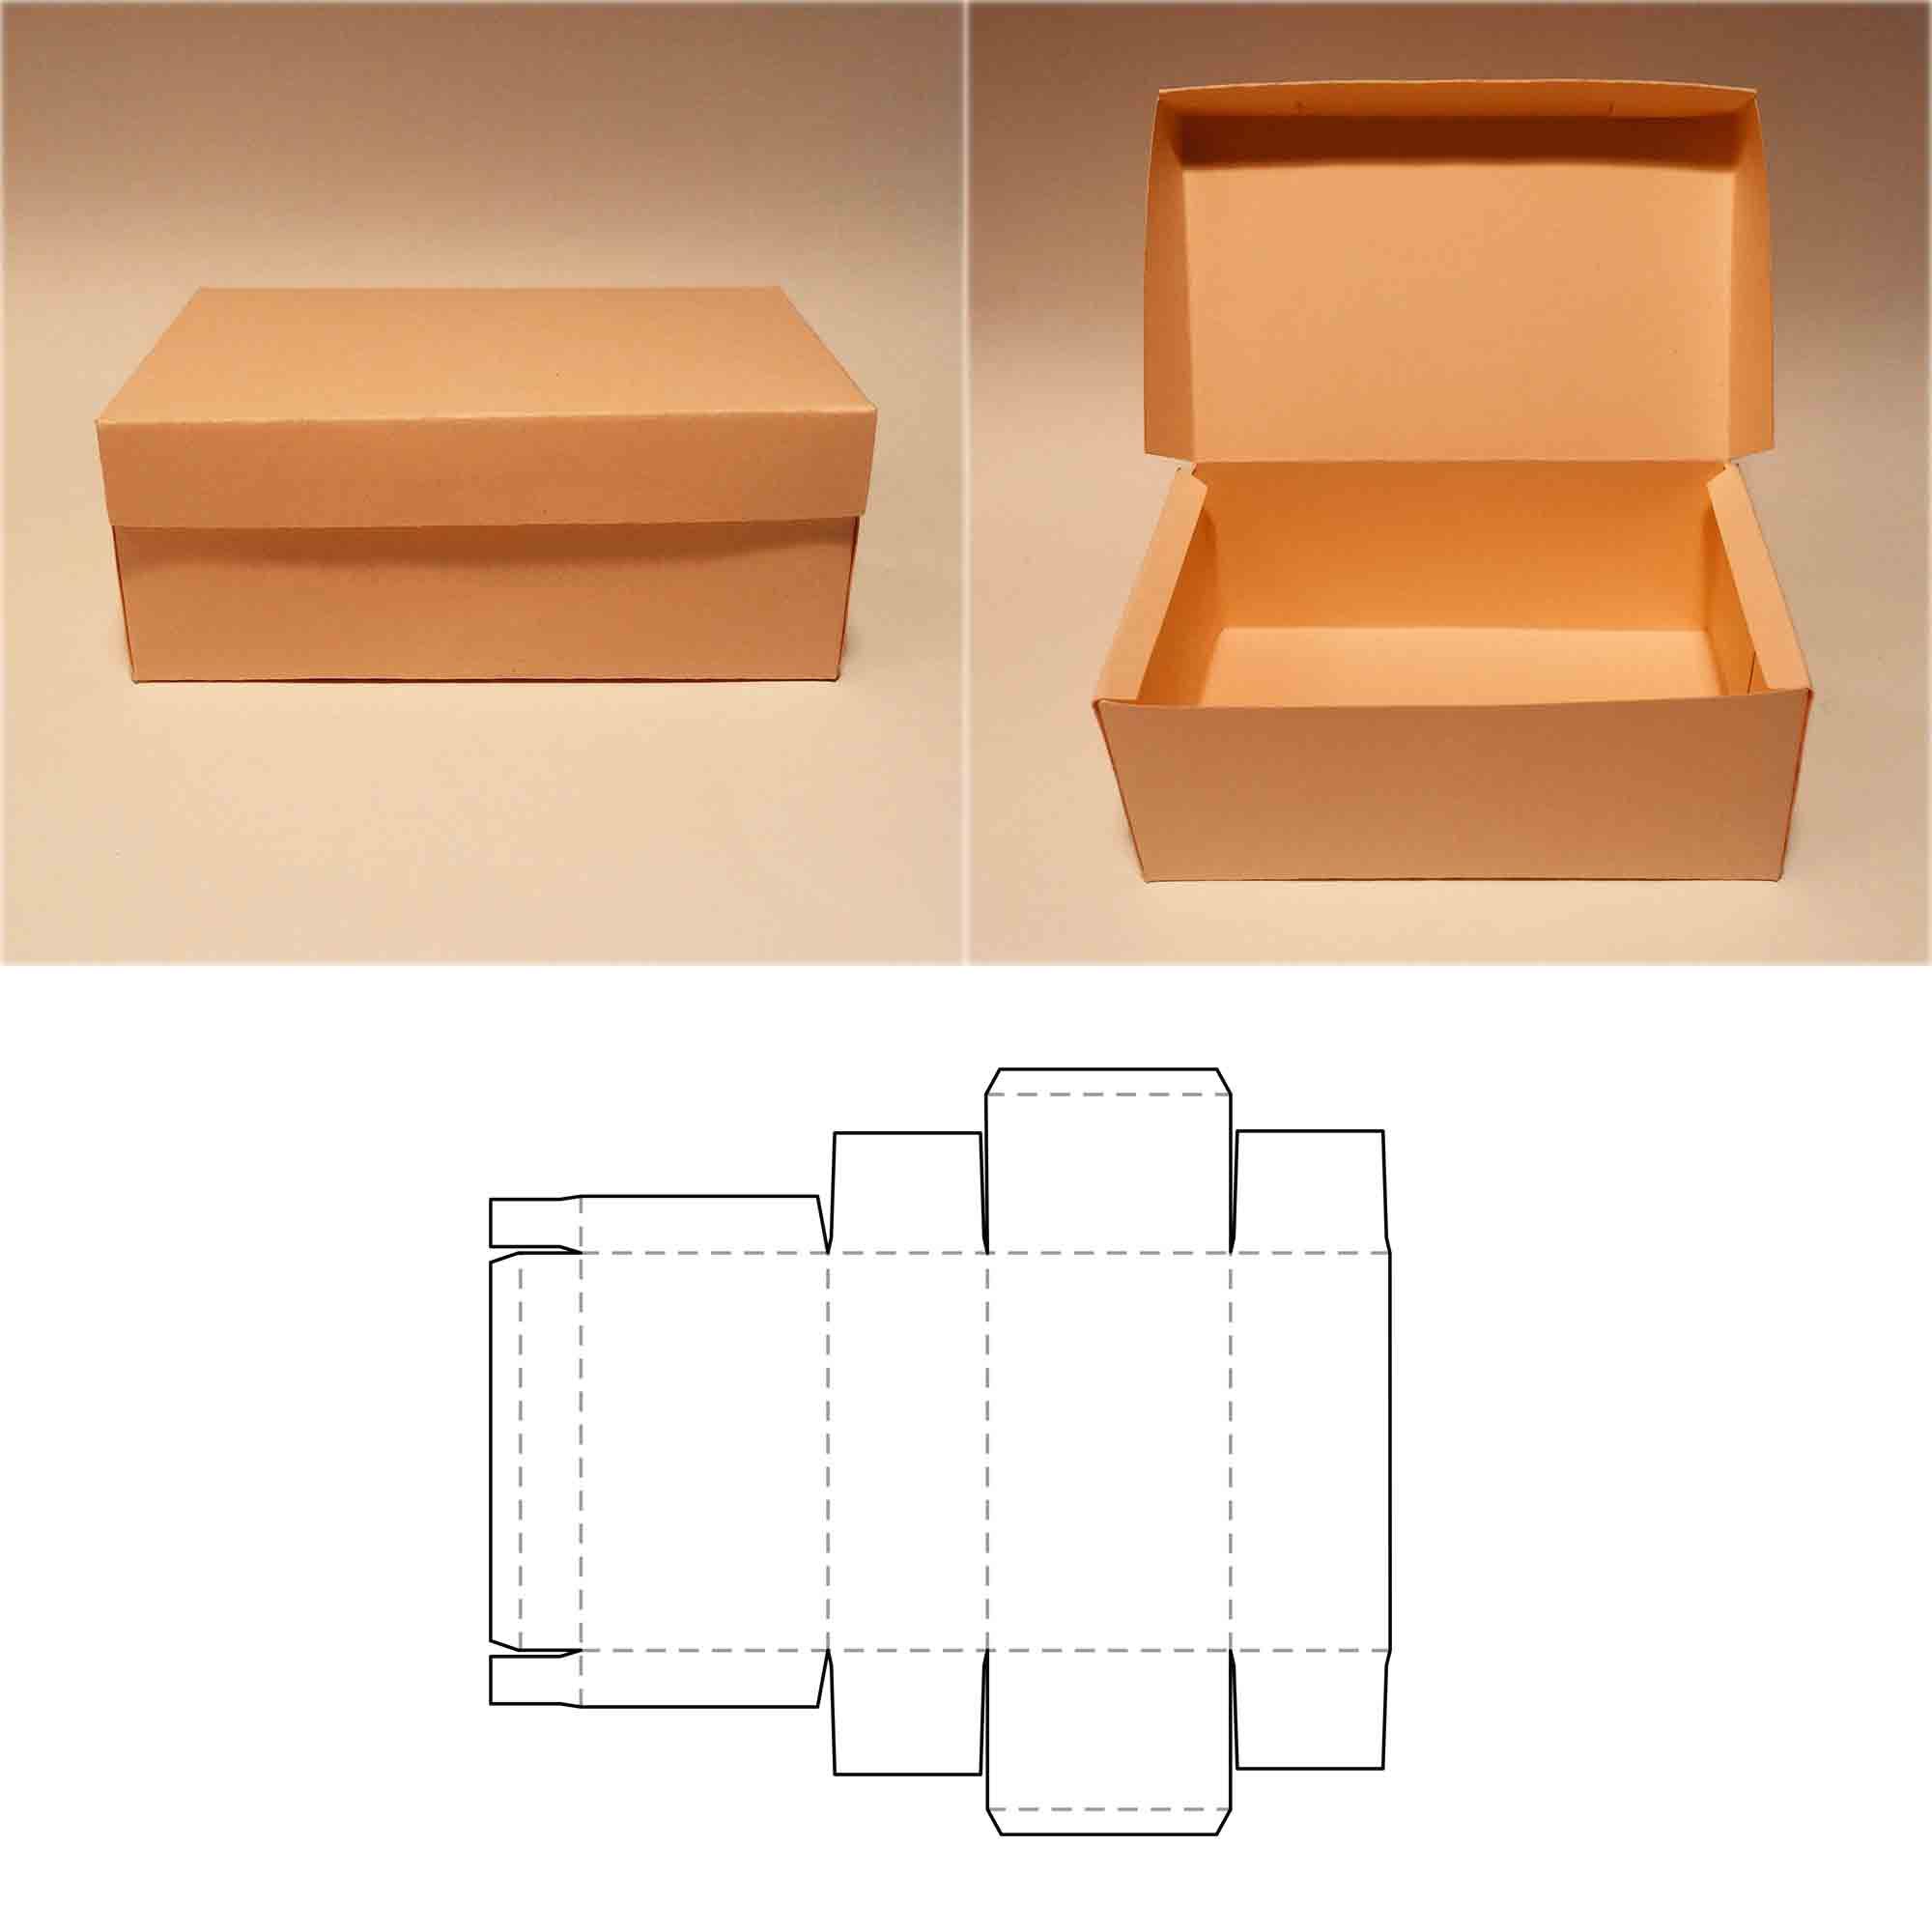 Decorative File Boxes With Lids